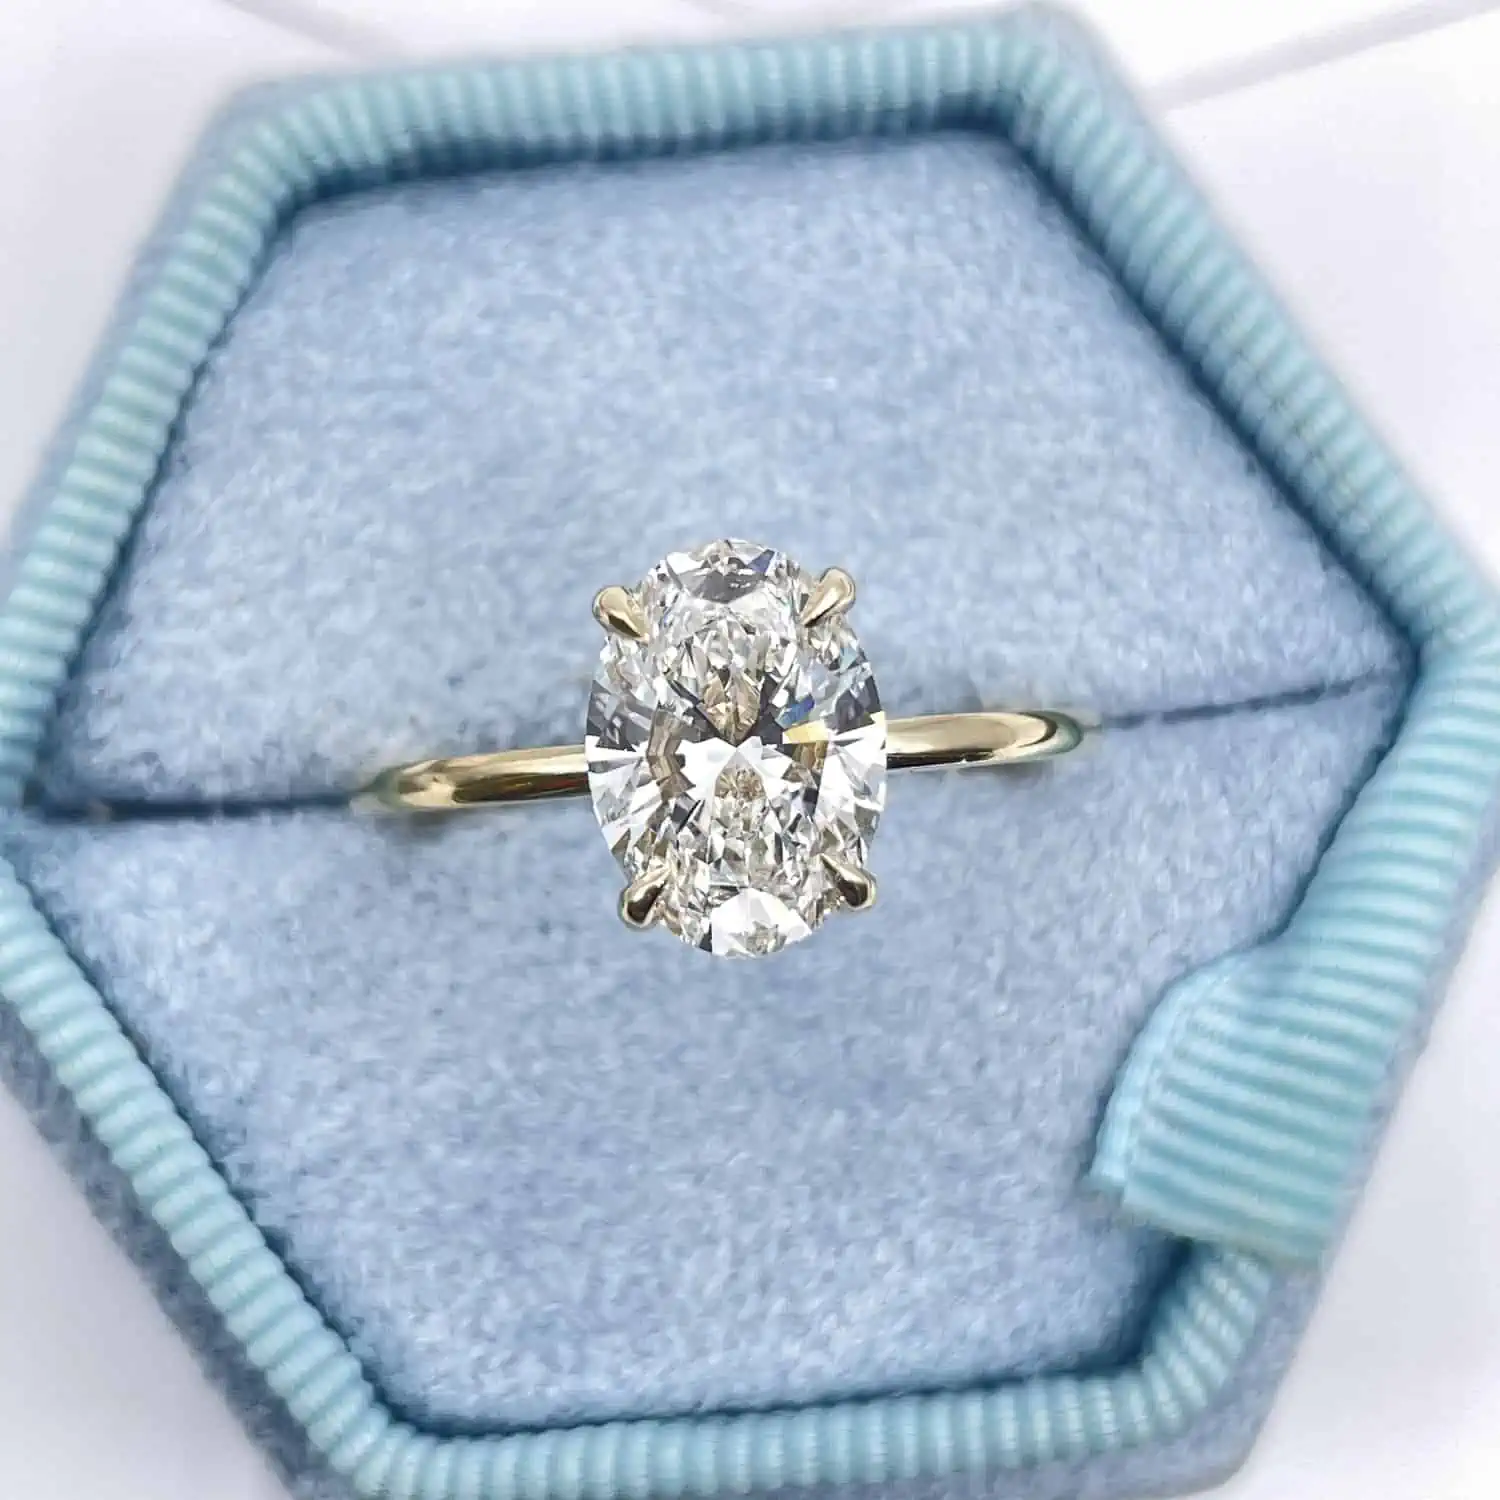 Oval Cut Diamond Solitaire Engagement Ring on a blue box